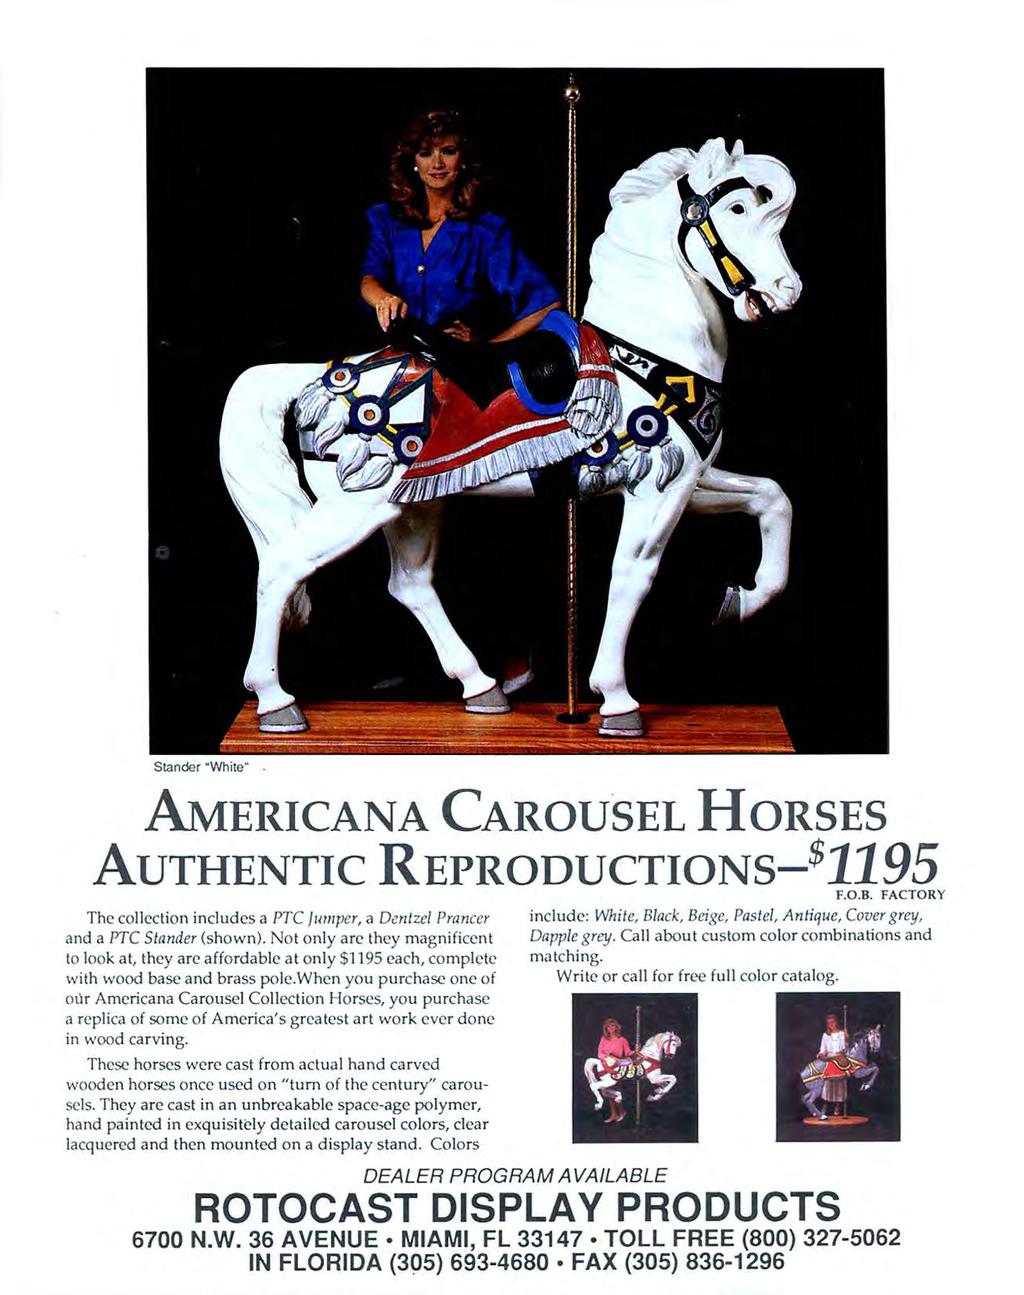 Stander "White. AMERICANA CAROUSEL HoRsEs AUTHENTIC REPRODUCTIONS-$1195 The collection includes a PTC jumper, a Oentzel Prancer and a PTC Stander (shown).